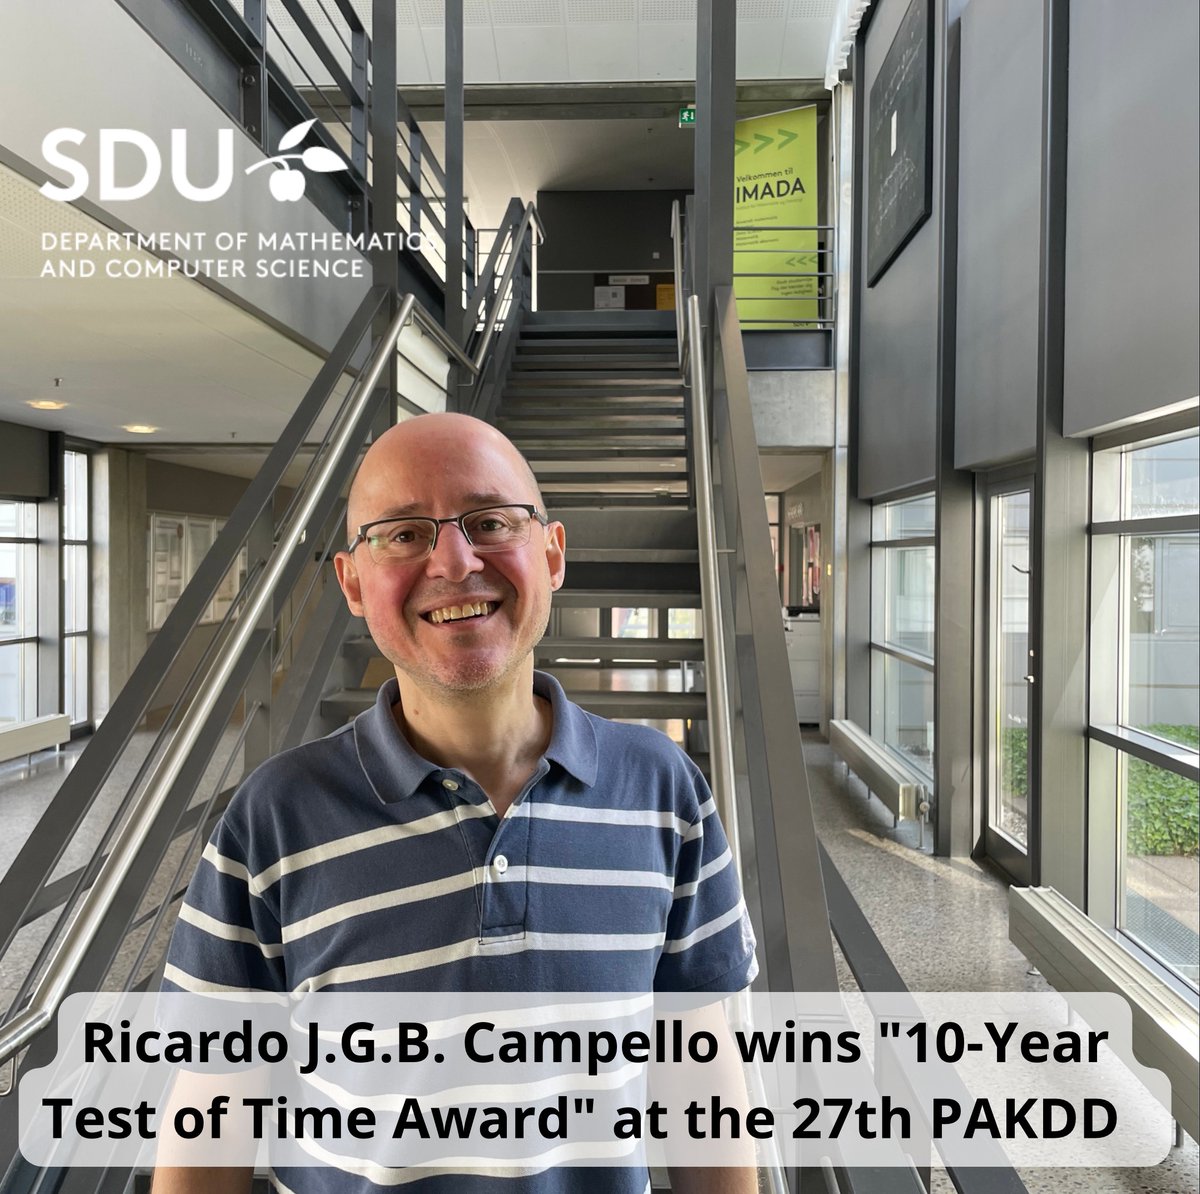 The research paper 'Density-based Clustering based on Hierarchical Density Estimates”, by Ricardo J. G. B. Campello (IMADA), D. Moulavi and J. Sander (University of Alberta) has won the prestigious '10-Year Test of Time Award' at the 27th PAKDD👏pakdd2023.org/awards/